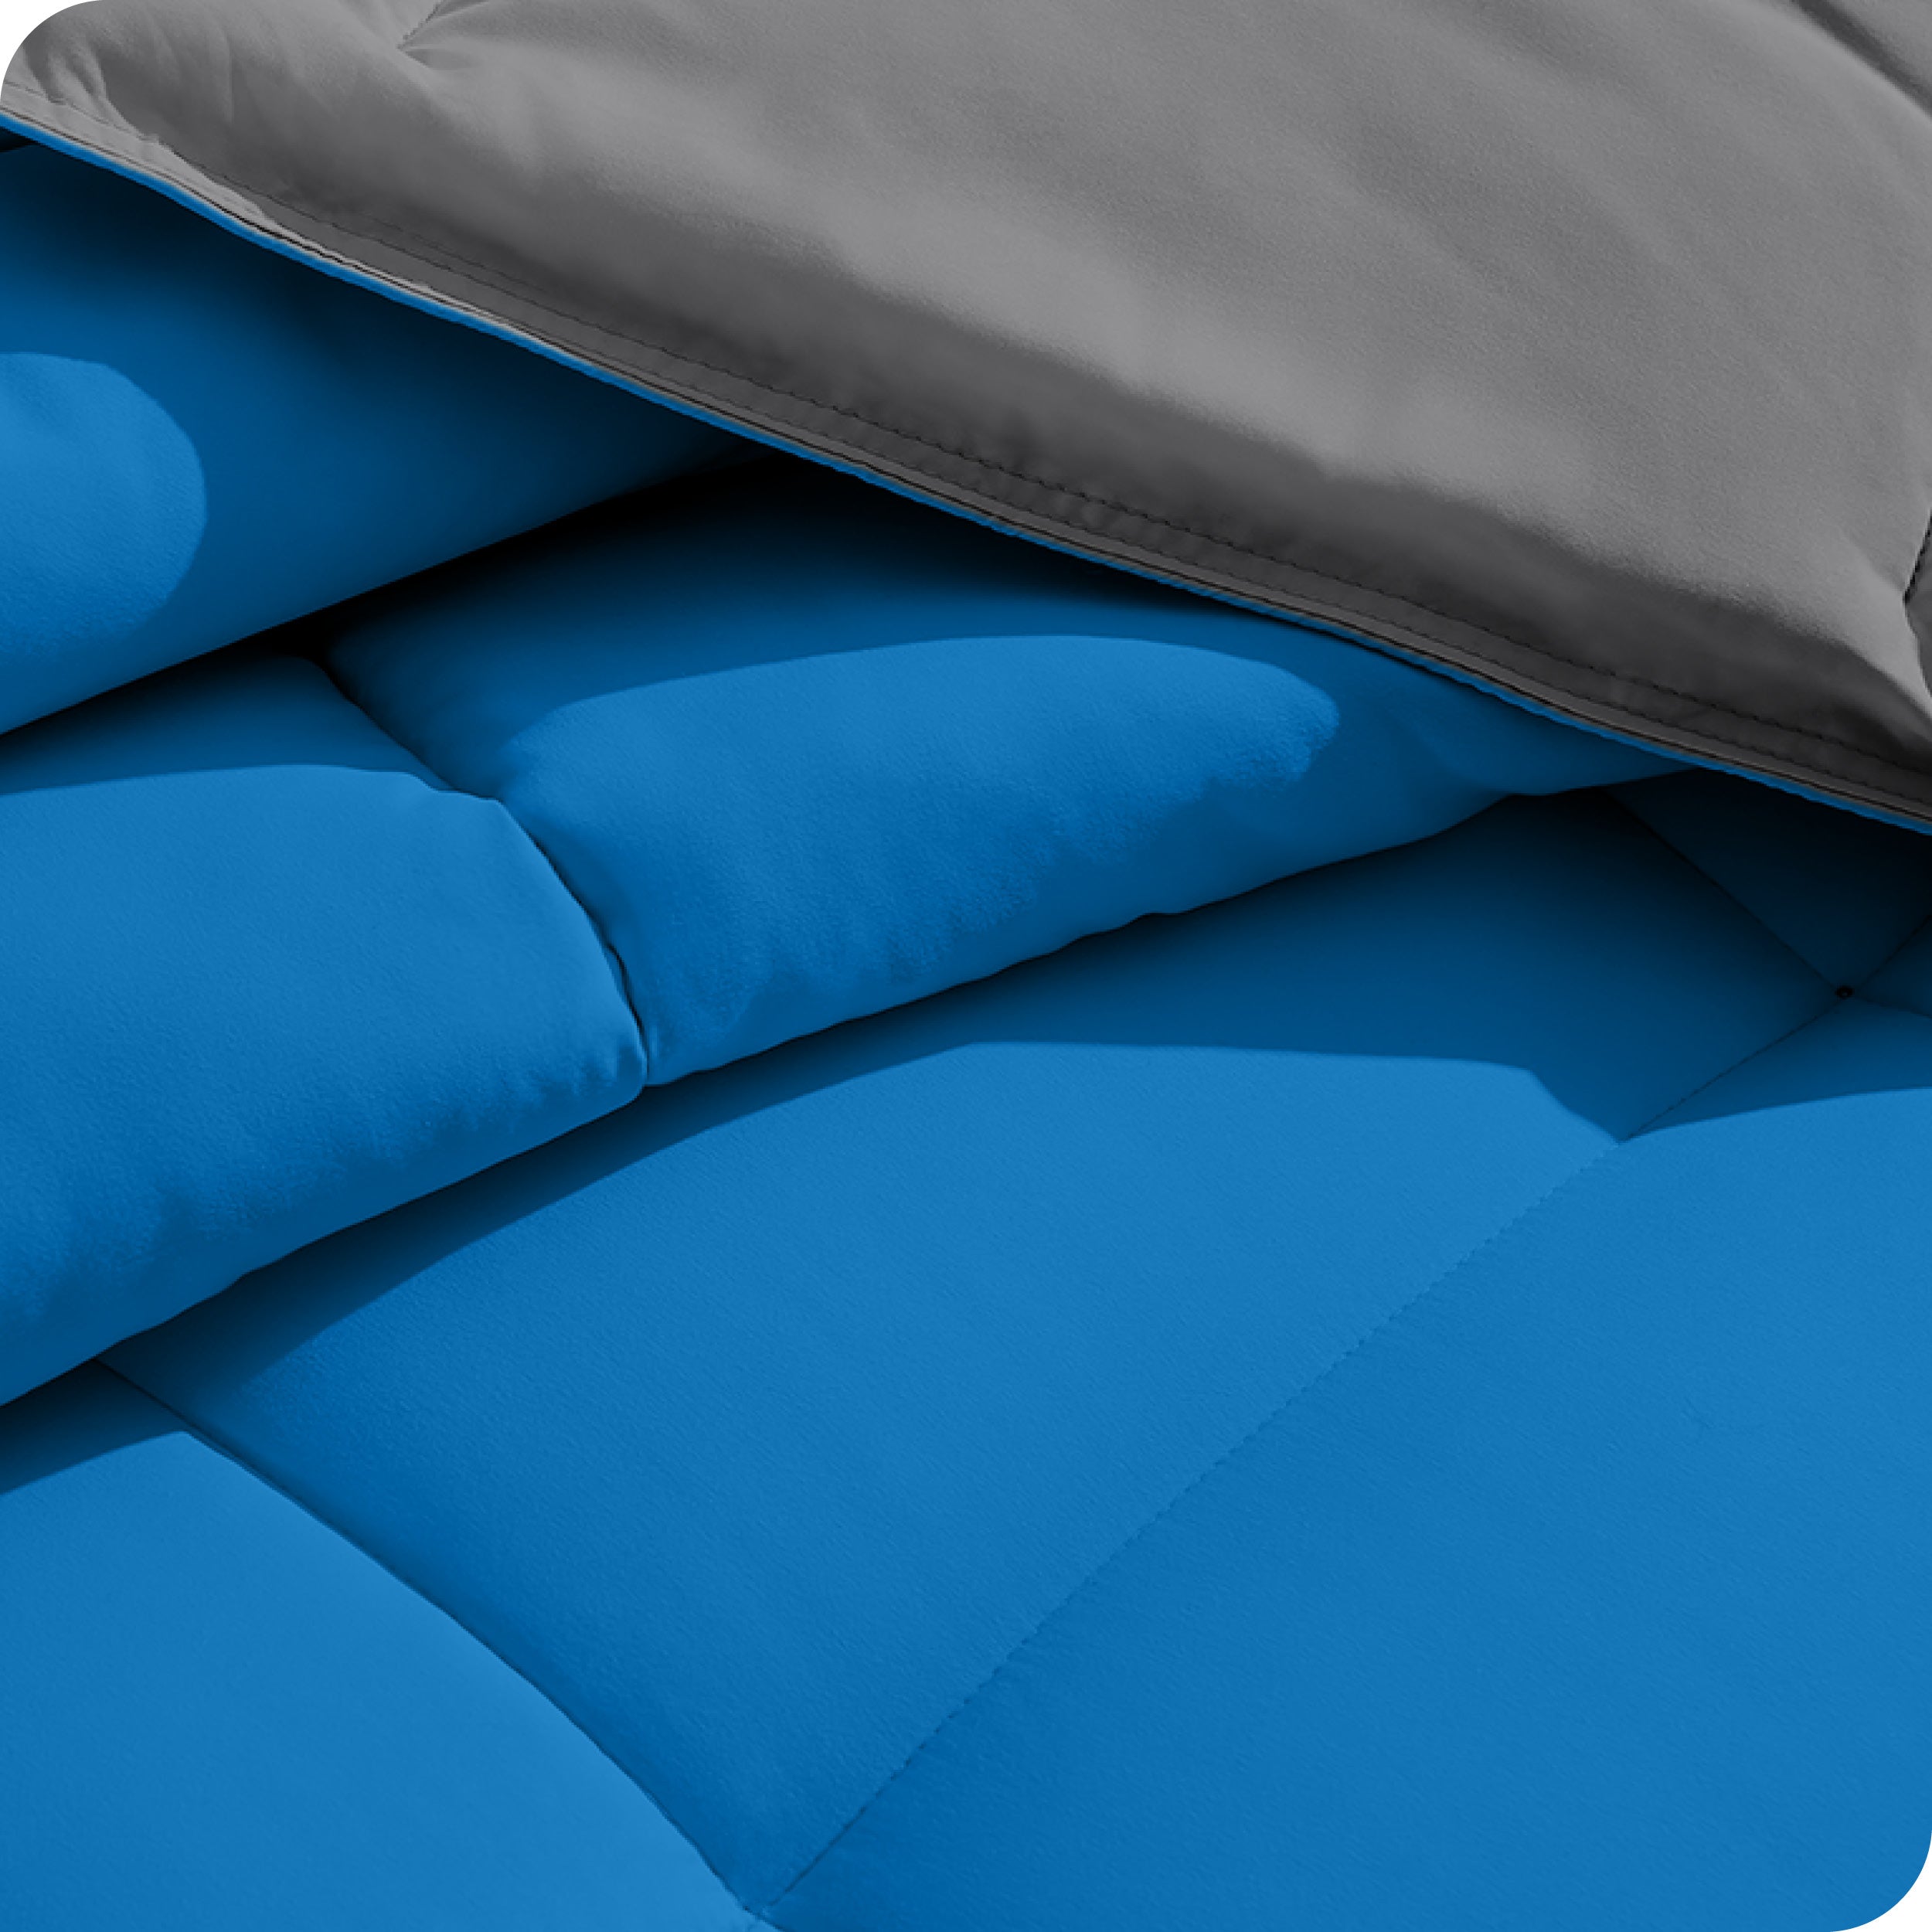 Close up of the reversible comforter showing the box stitching and the two colors